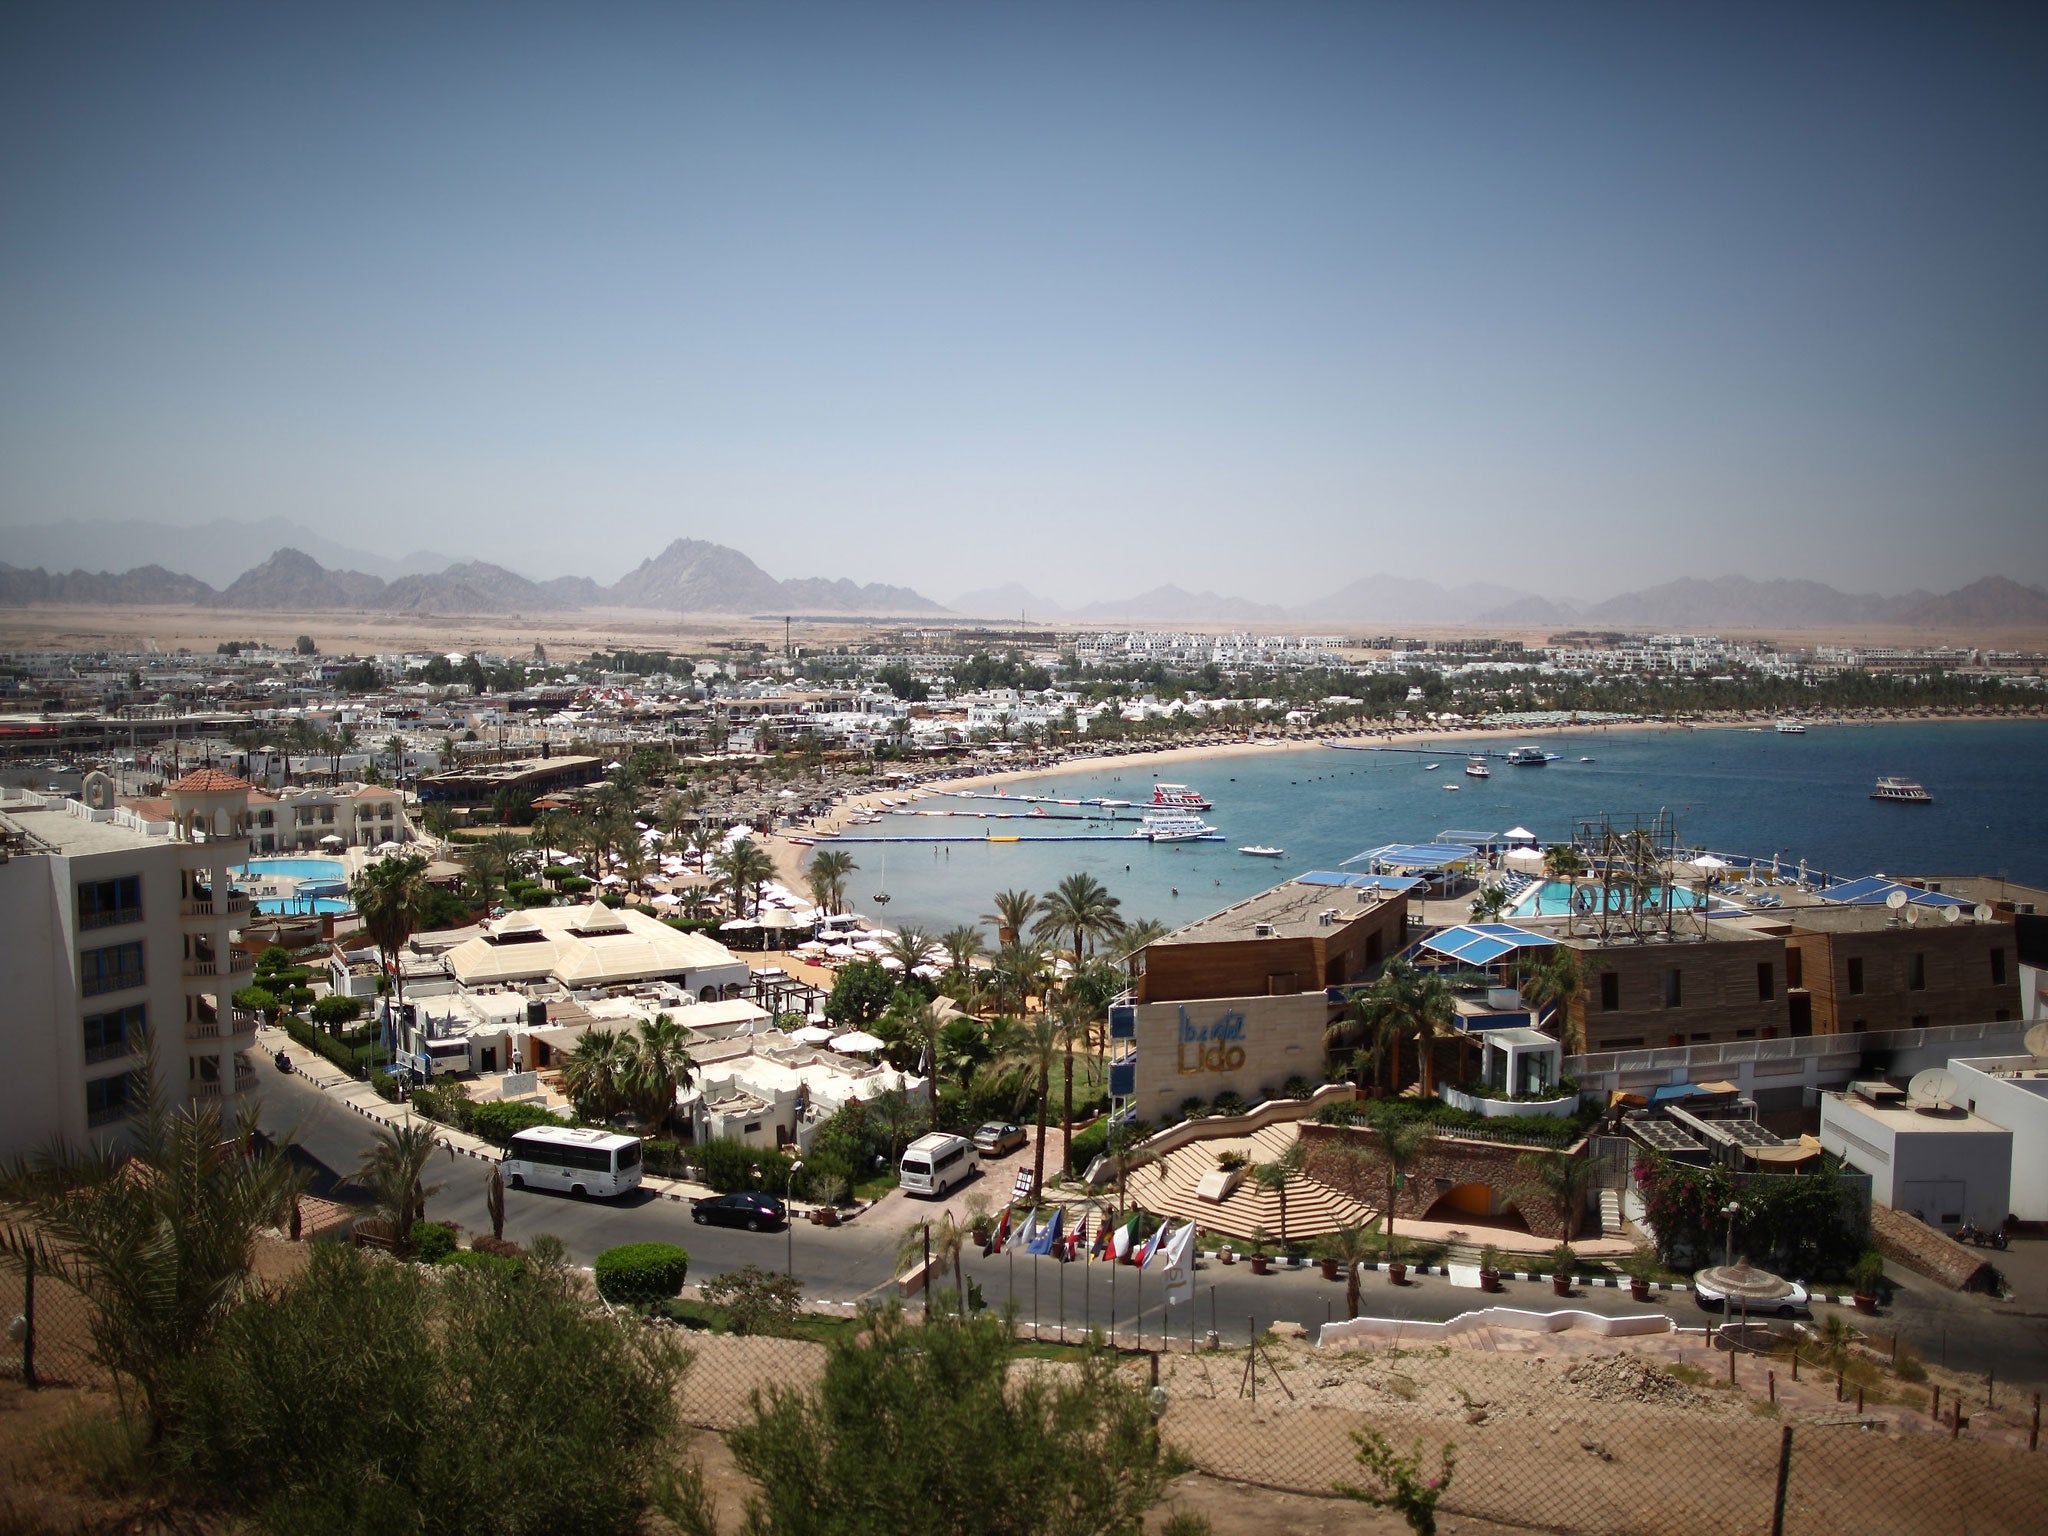 Sharm El Sheikh in Egypt is popular with British tourists